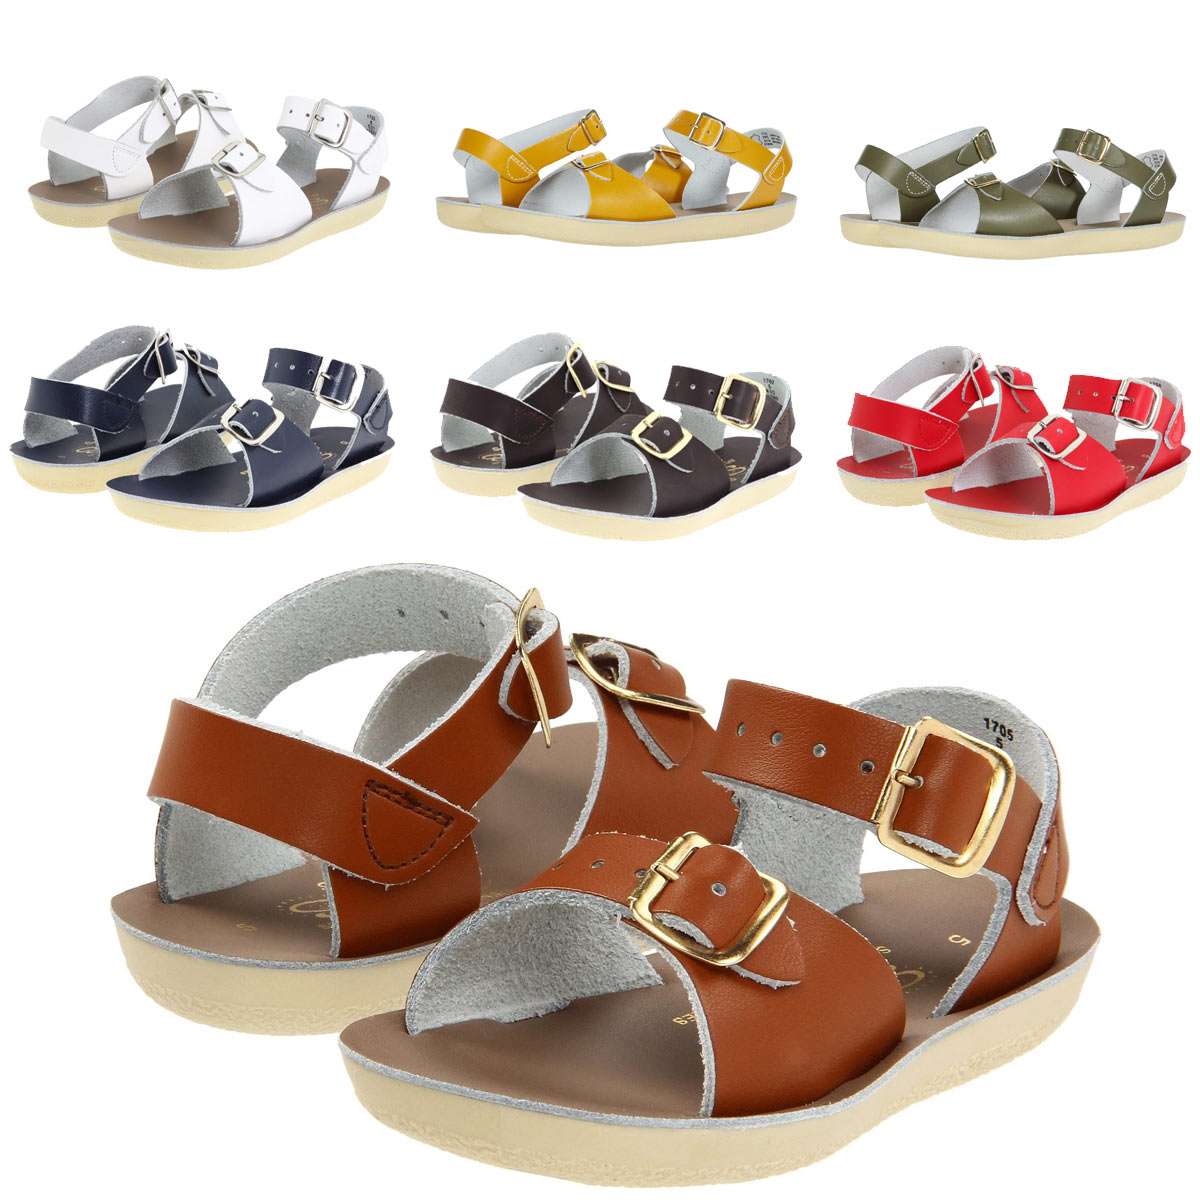 ȥ by ۥ 塼  å ٥ӡ  ˥å ȥɥ ˥  Sandal Salt Water Sandal by Hoy Shoes